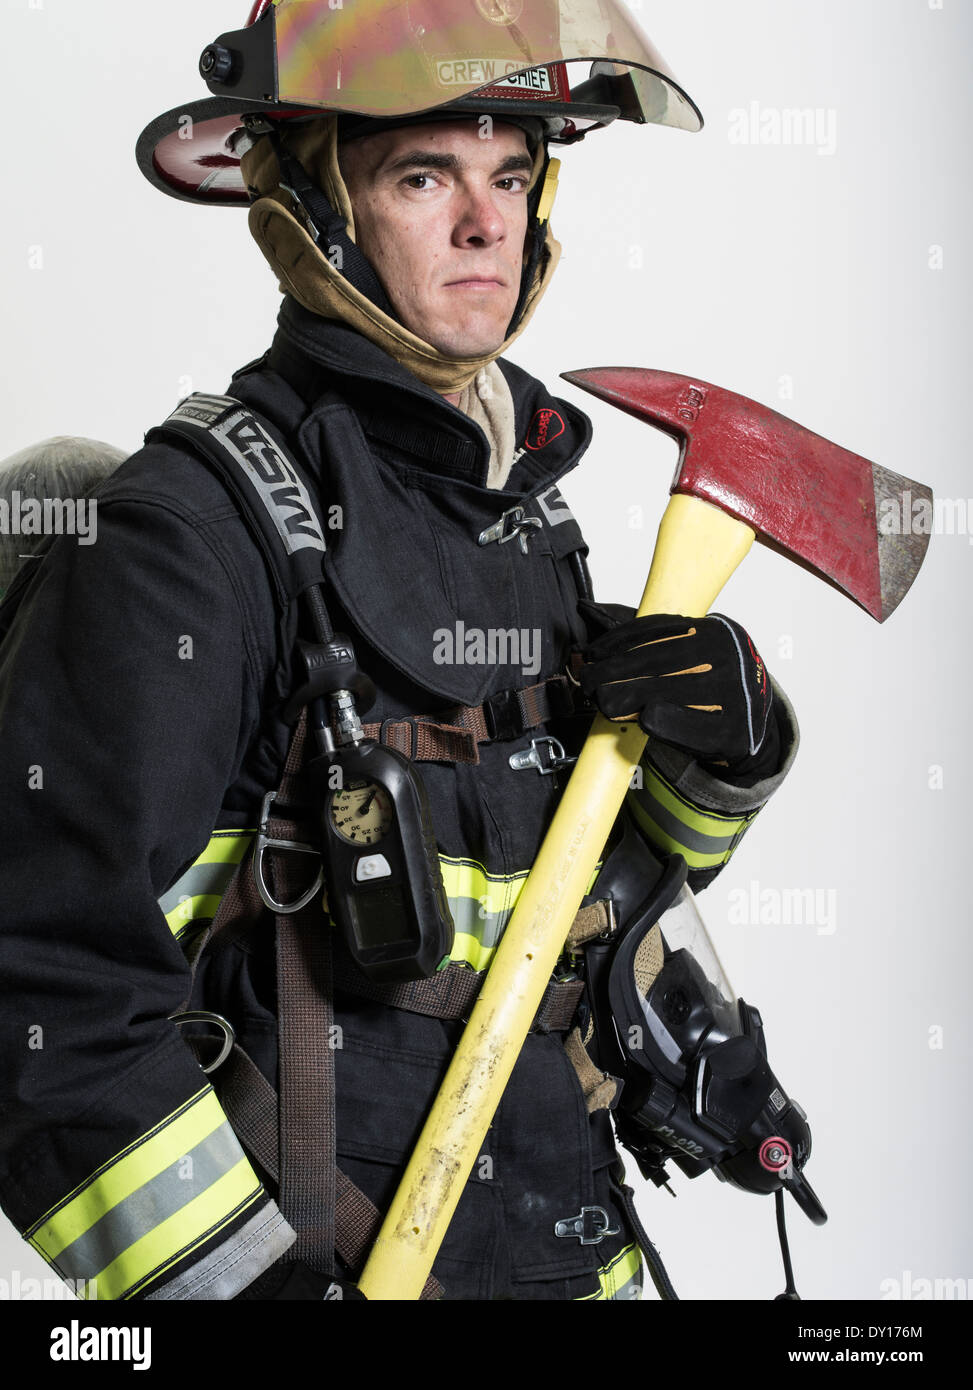 Male firefighter in structural firefighting uniform with breathing apparatus and axe Stock Photo